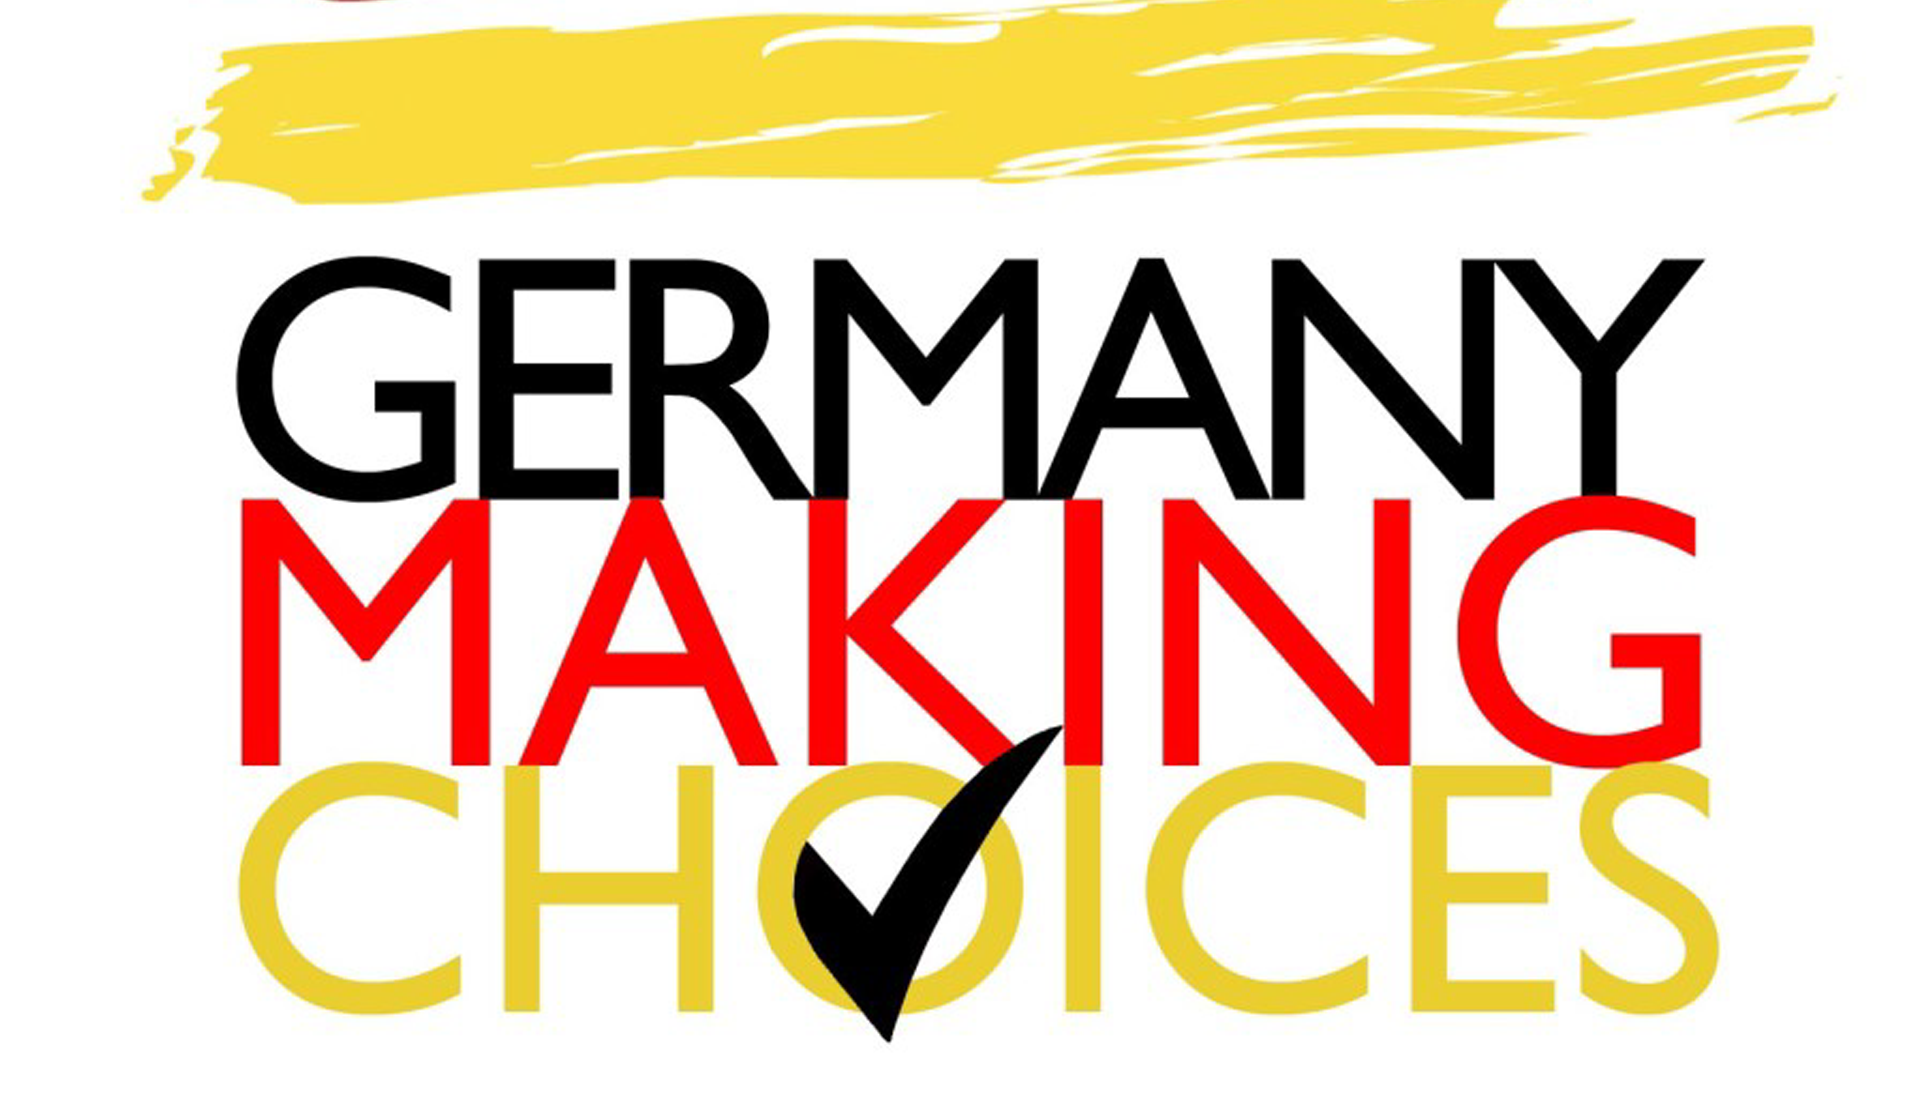 Center for European Studies - Germany Making Choices, red, black, yellow artwork with title